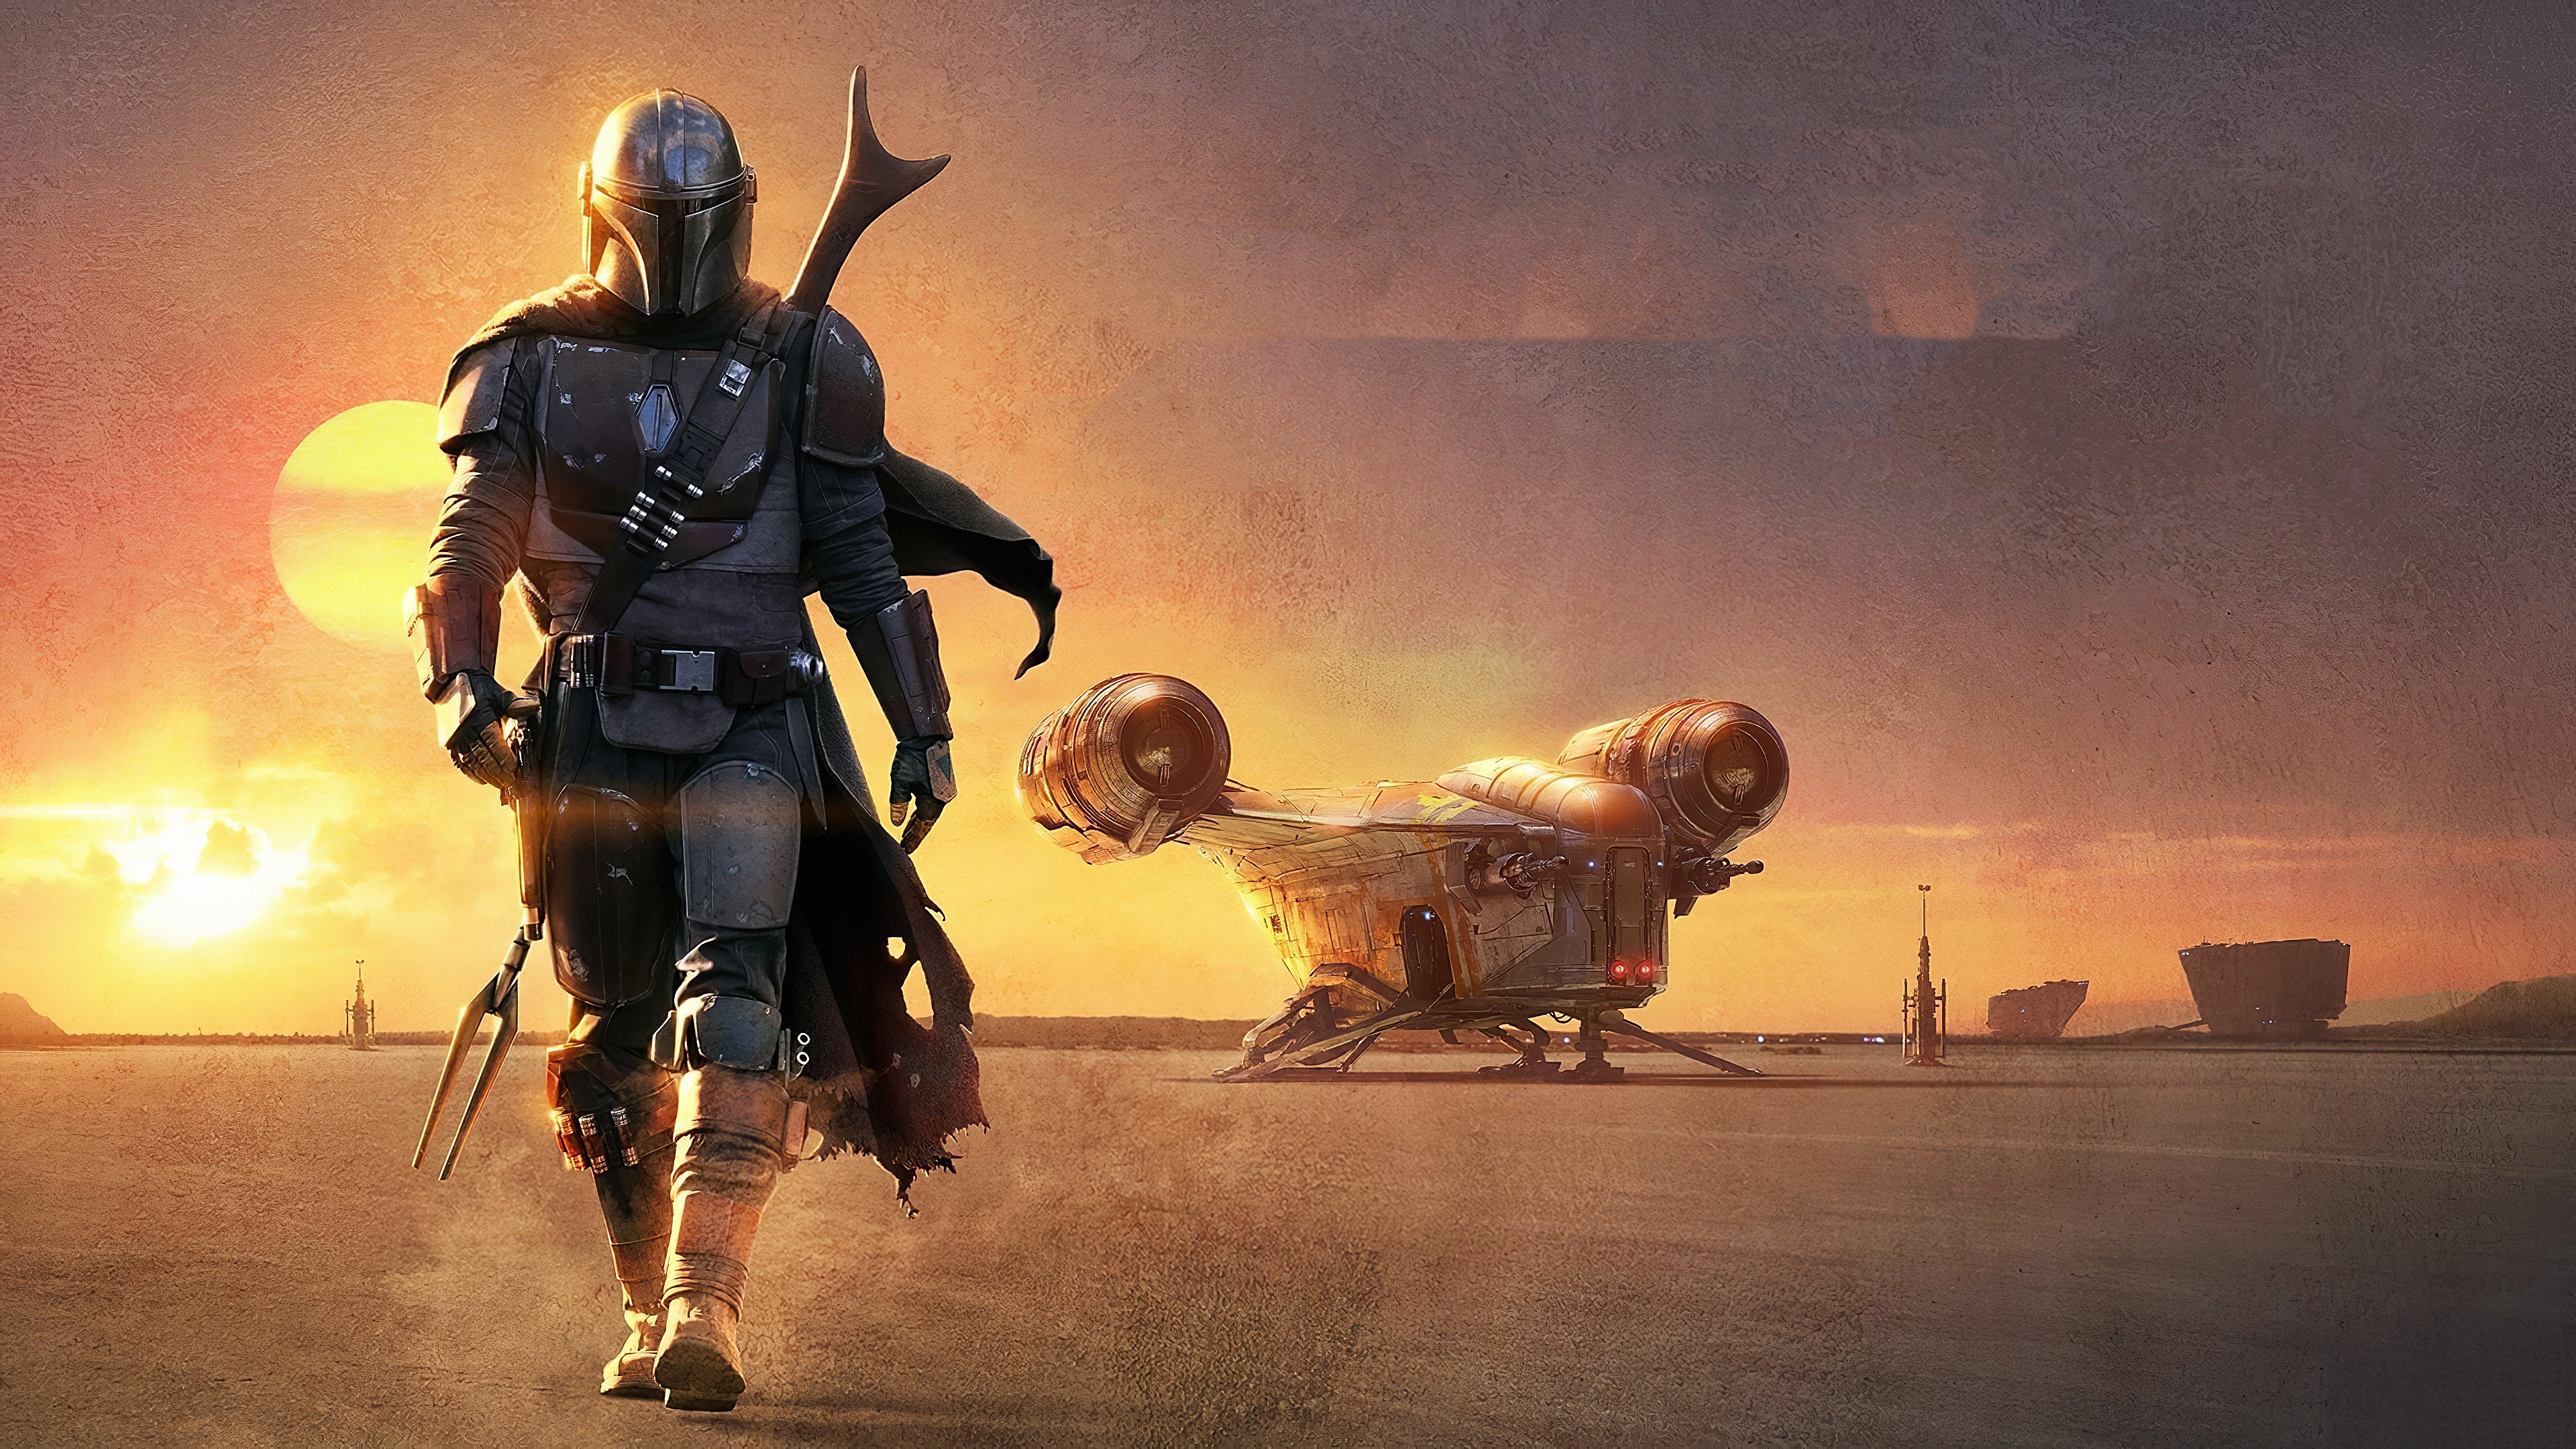 Download The Mandalorian wallpapers for mobile phone free The  Mandalorian HD pictures